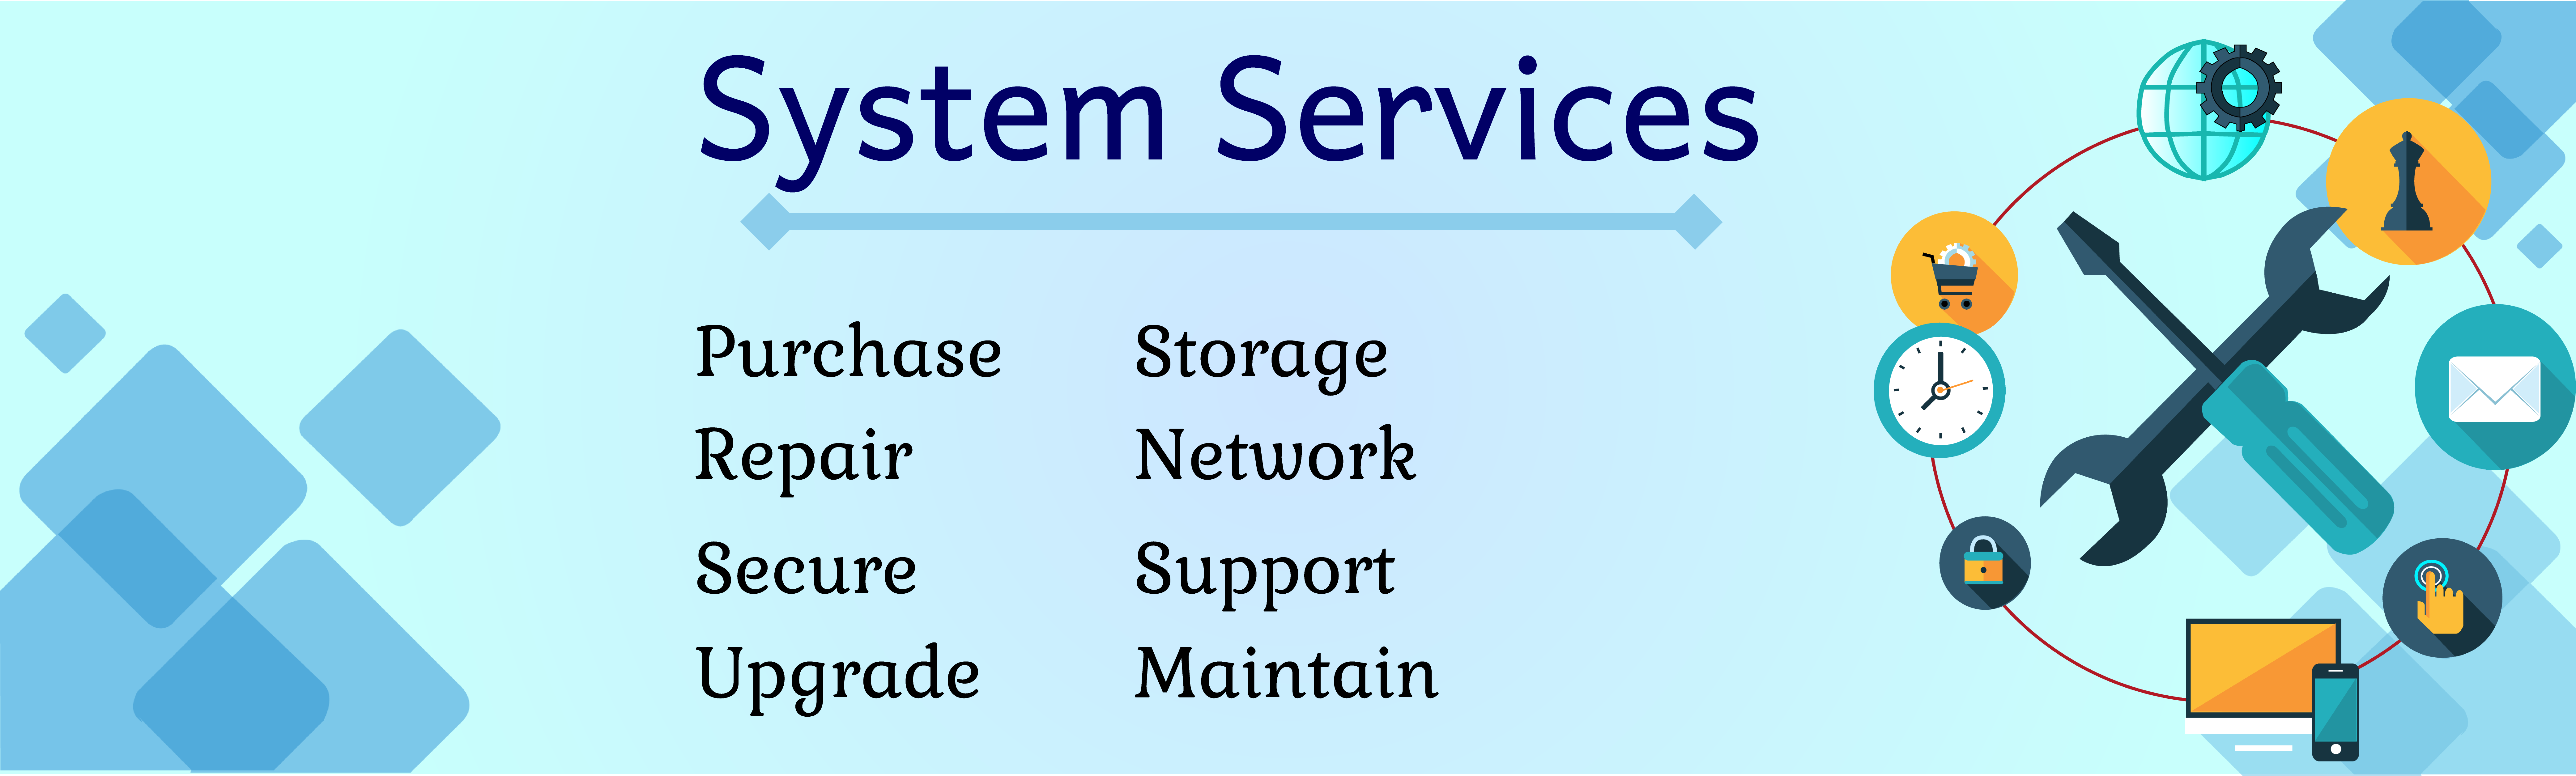 system services main